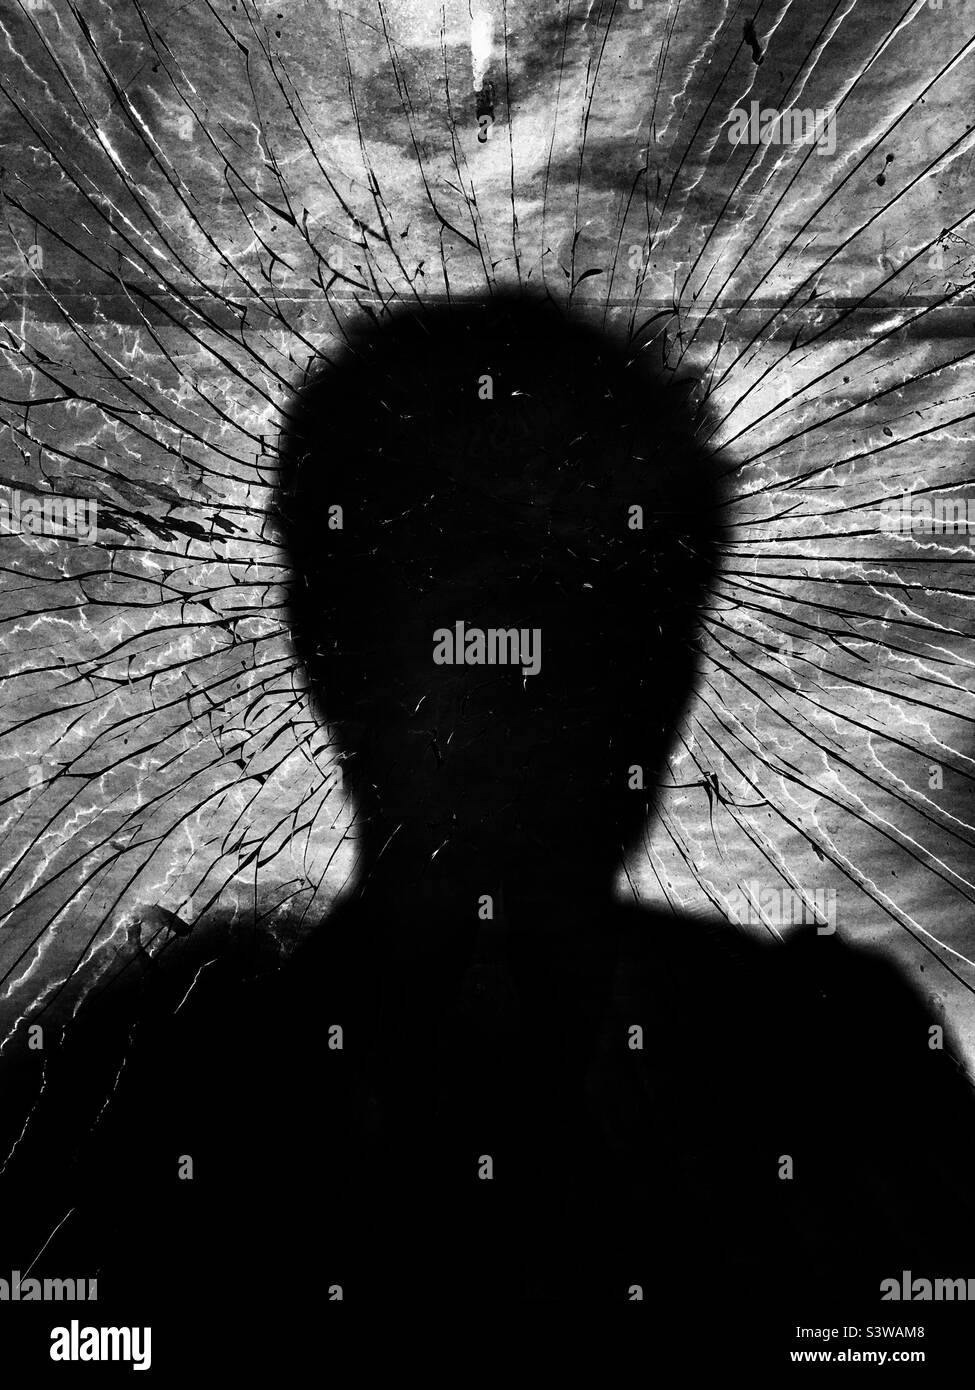 Silhouette of a person against shattered glass Stock Photo